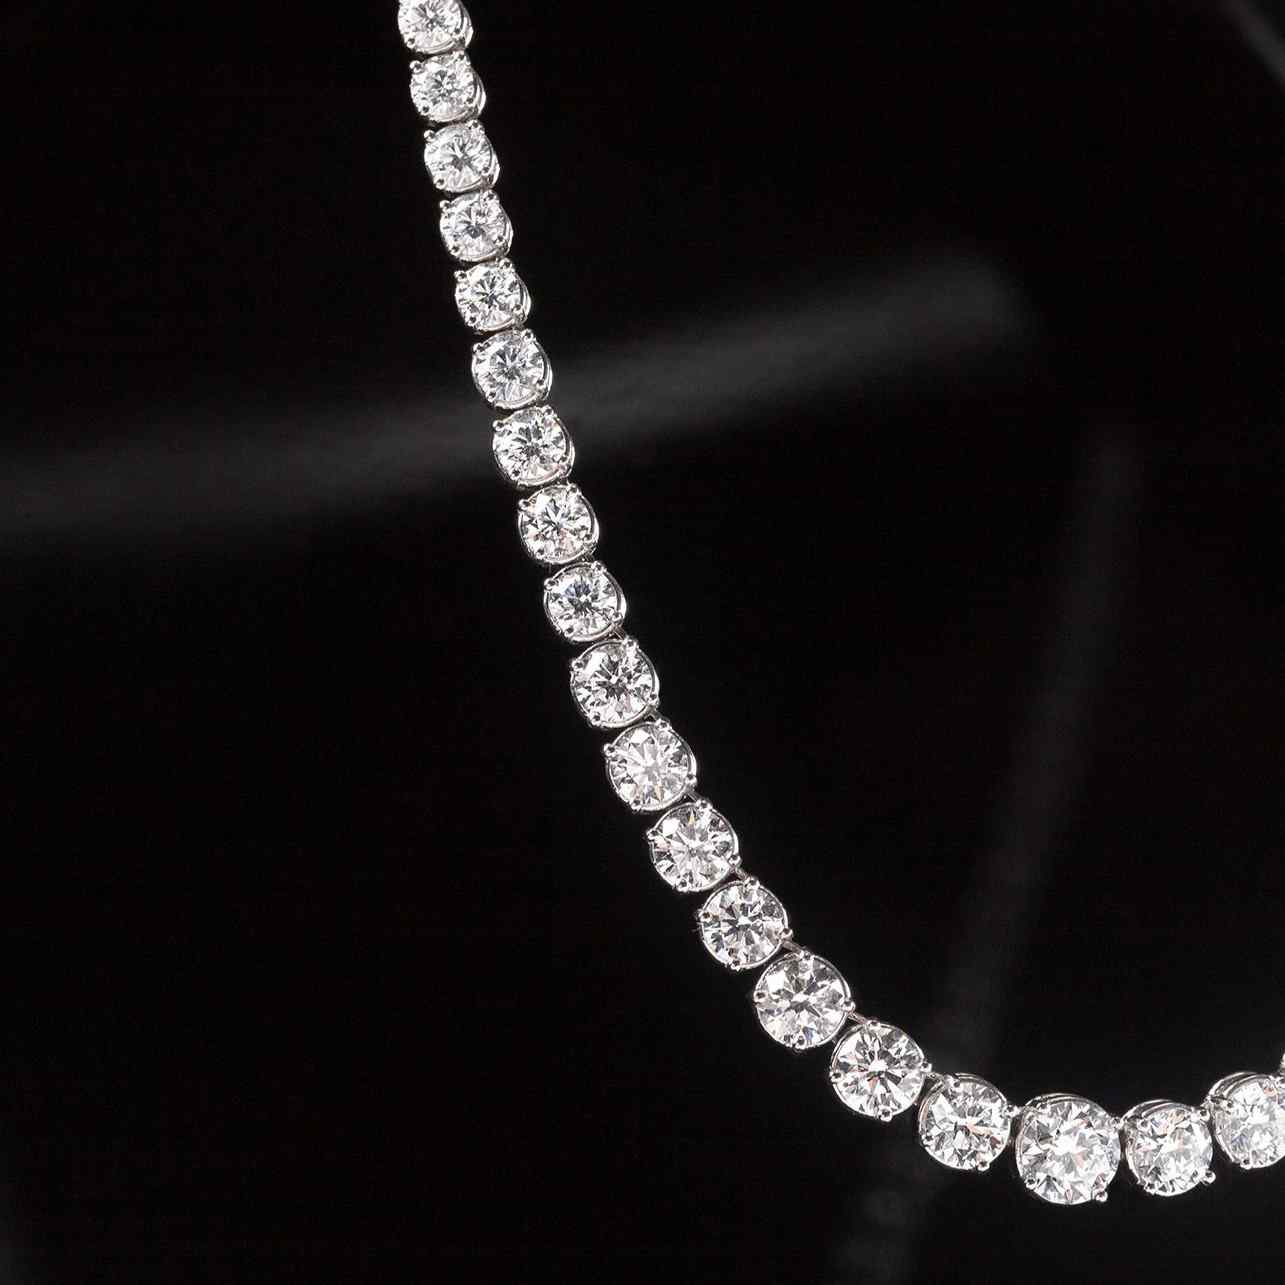 The Collier Rivière Necklace features graduated diamonds - a crescendo towards the main (and largest) diamond that sits at the center of this necklace. 